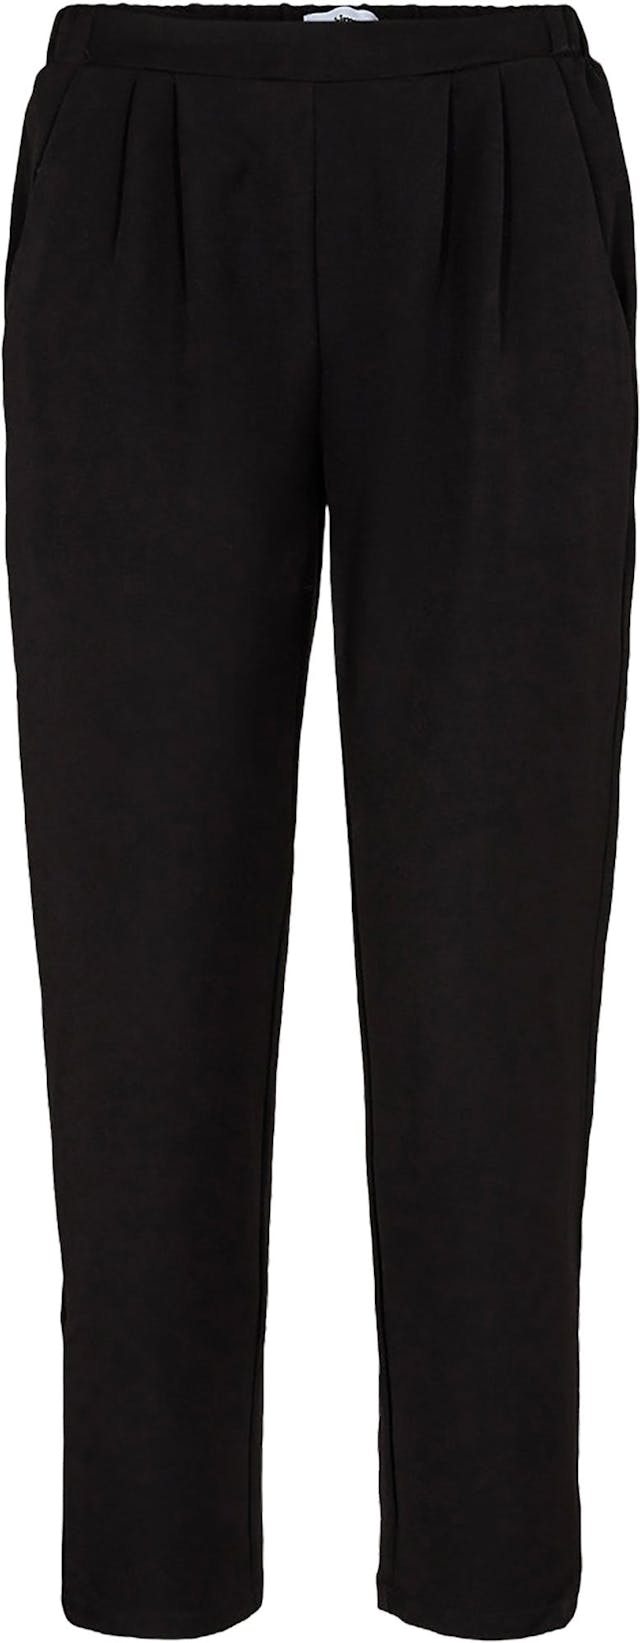 Product image for Sofja 2.0 Casual Pant - Women's